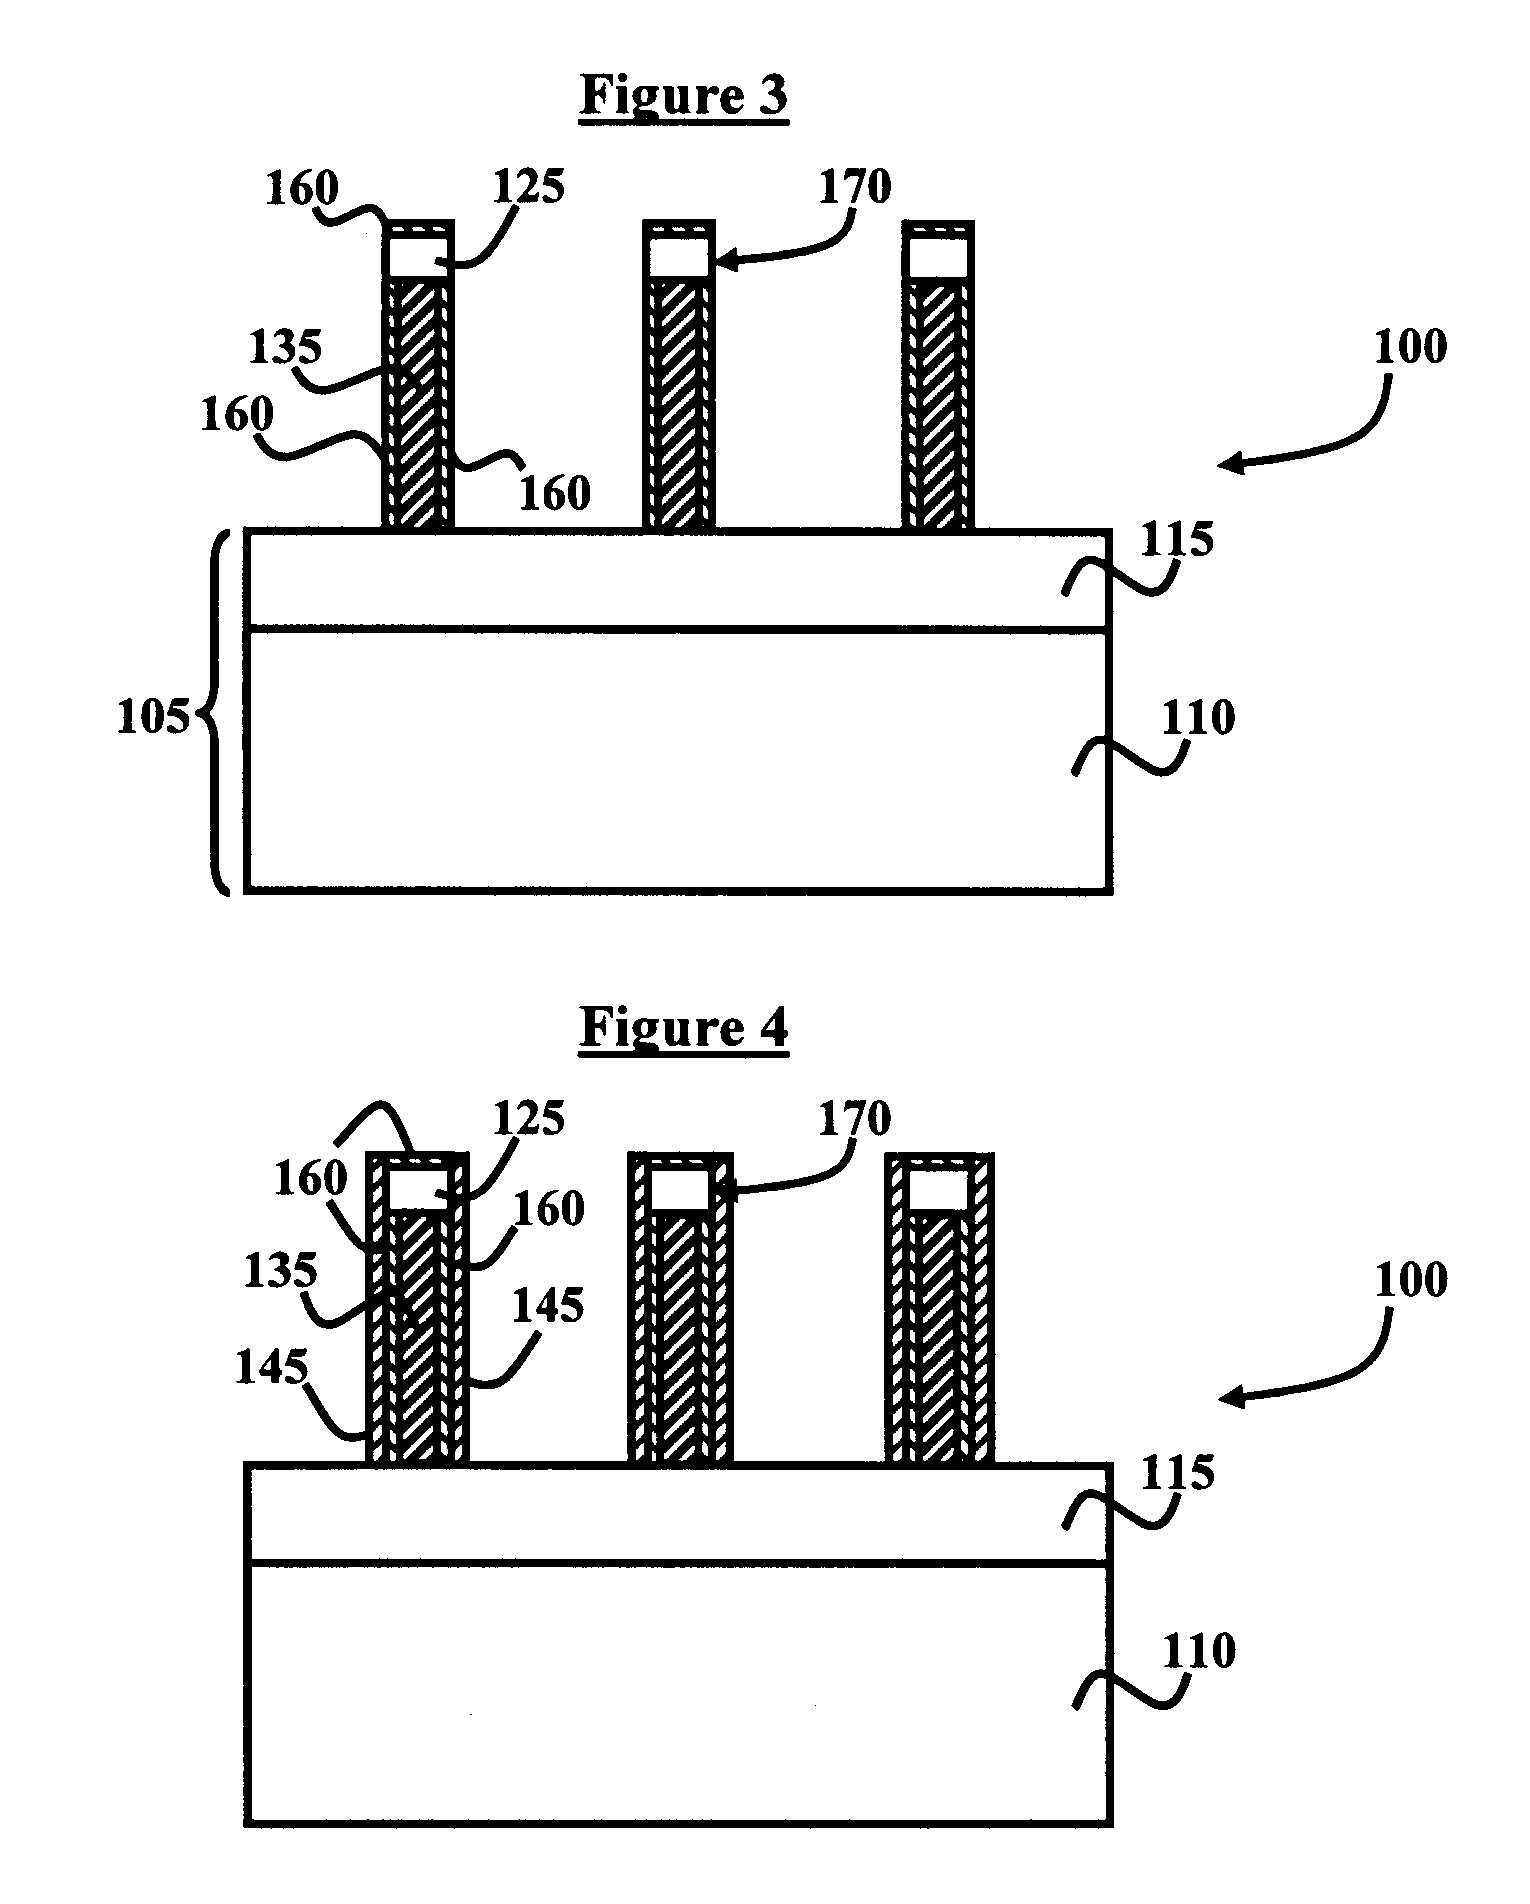 FinFET with low gate capacitance and low extrinsic resistance